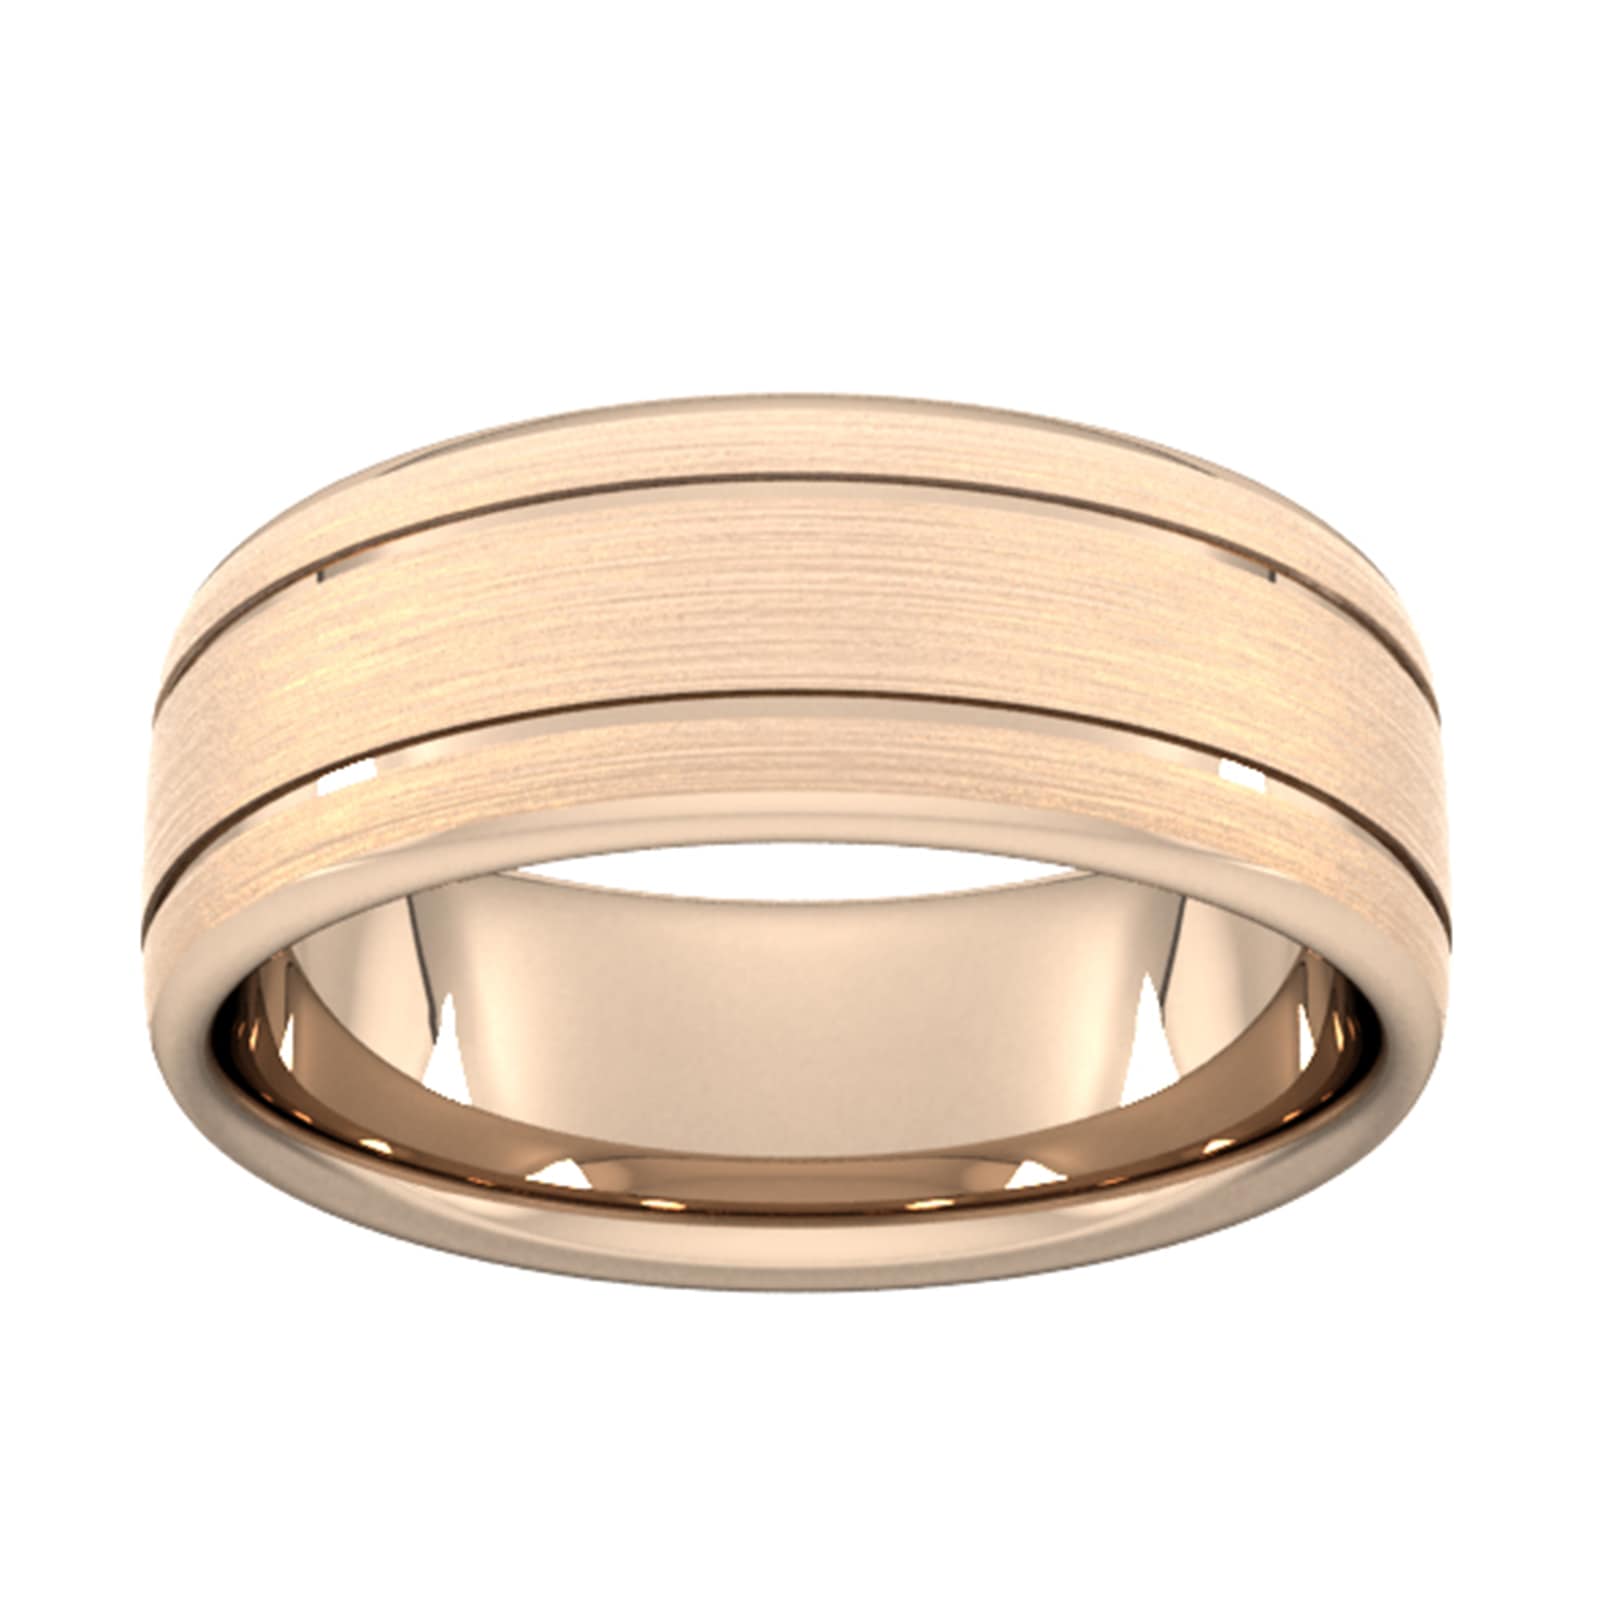 8mm d shape heavy matt finish with double grooves wedding ring in 9 carat rose gold - ring size u